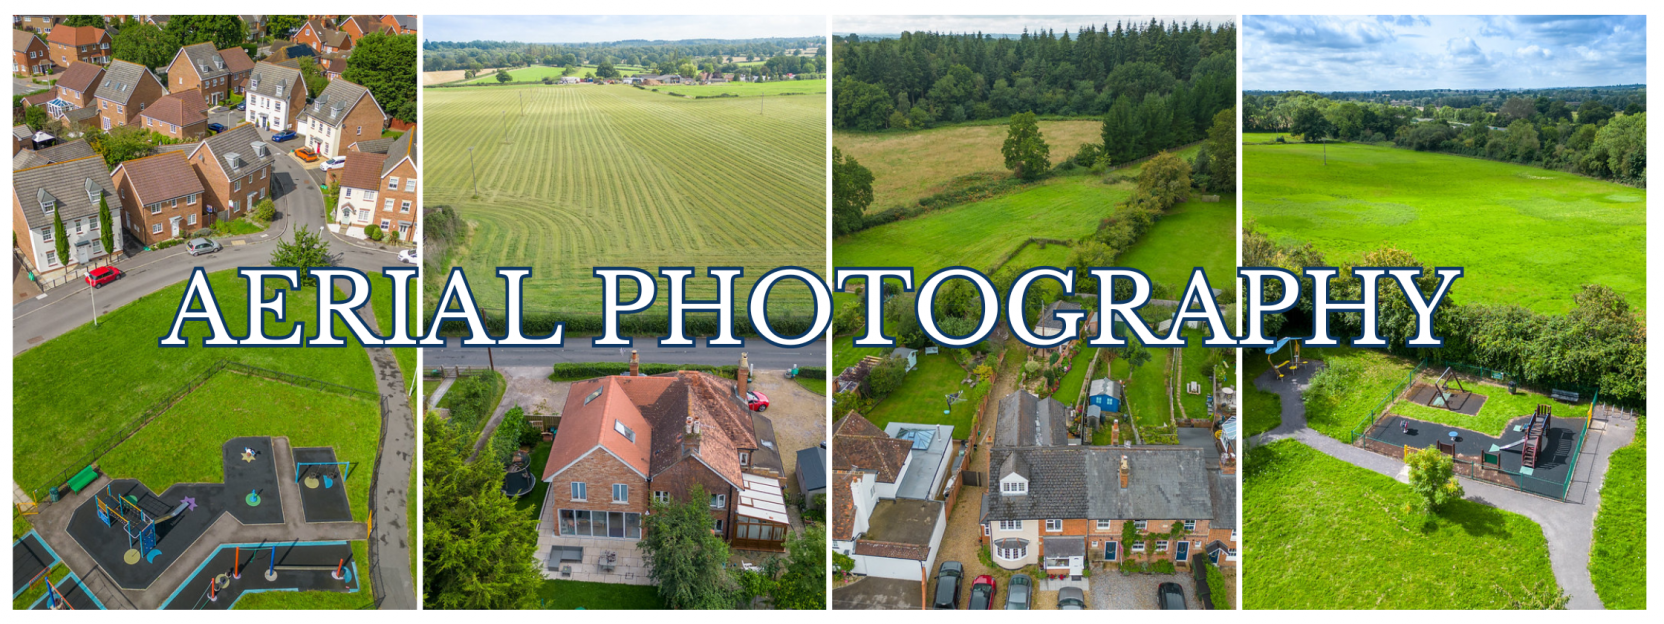 Aerial Photography WhitKnights Reading Blog Banner 1